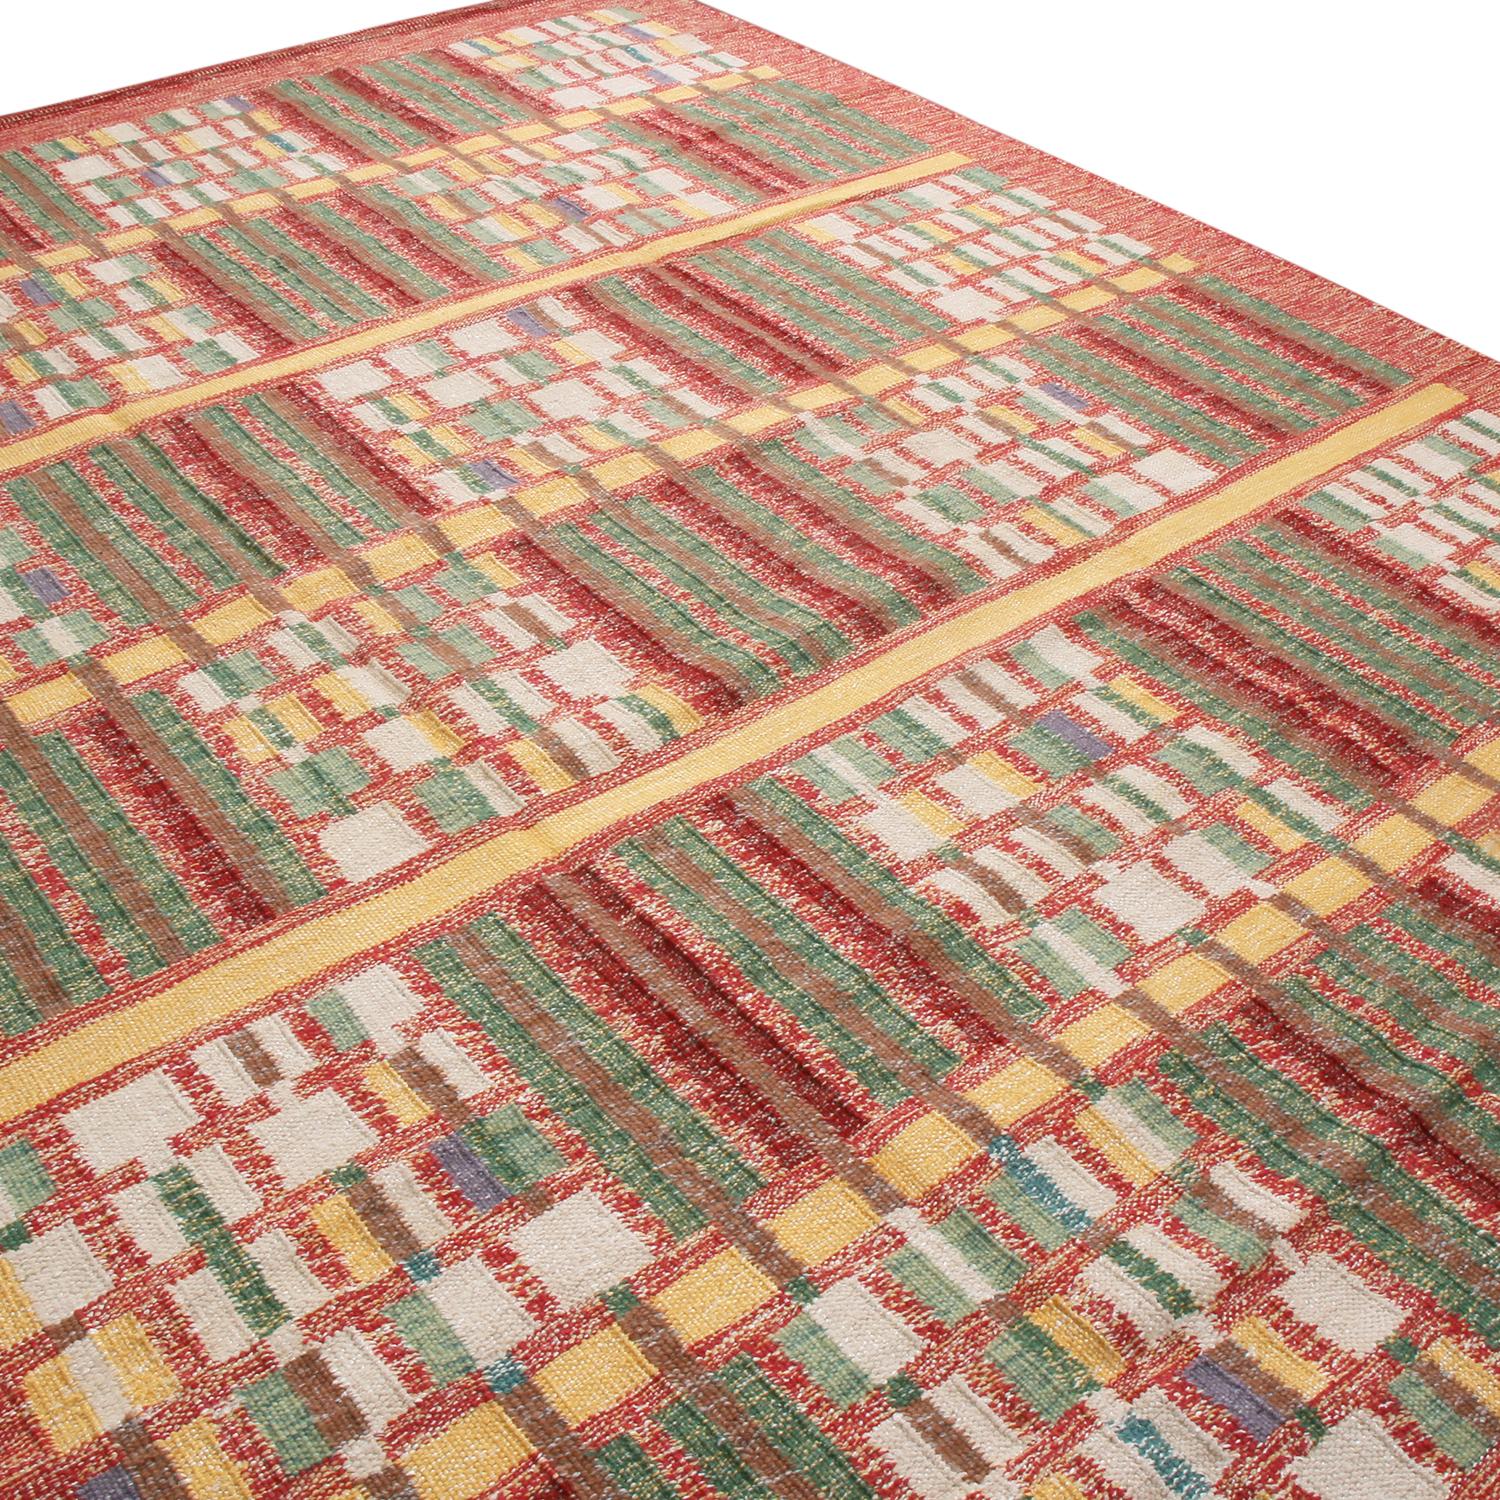 Originating from India, this hand knotted pile rug hails from Rug & Kilim’s Scandinavian-inspired collection, featuring a distinct tribal geometric all-over field design with bold red, green, and multi-tonal beige color ways. This design is